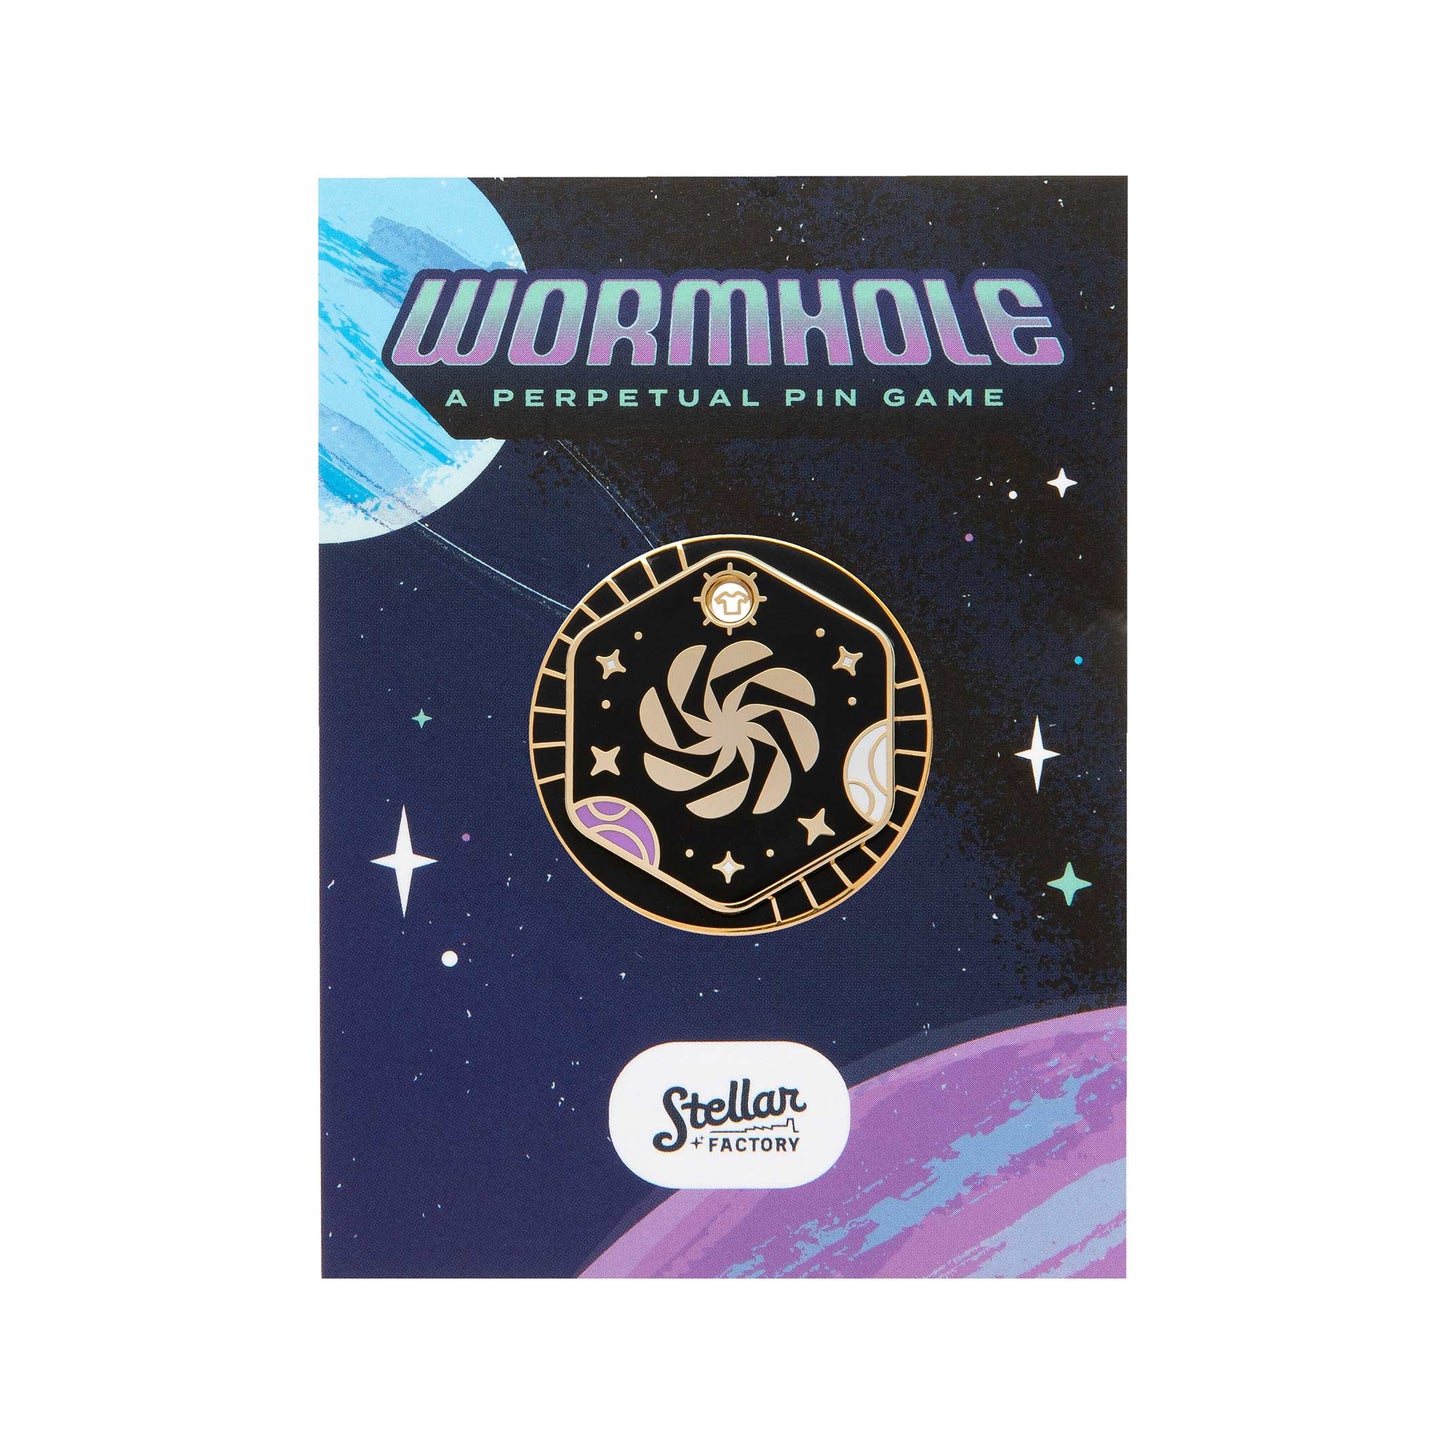 Game - Wormhole: A Perpetual Pin Game